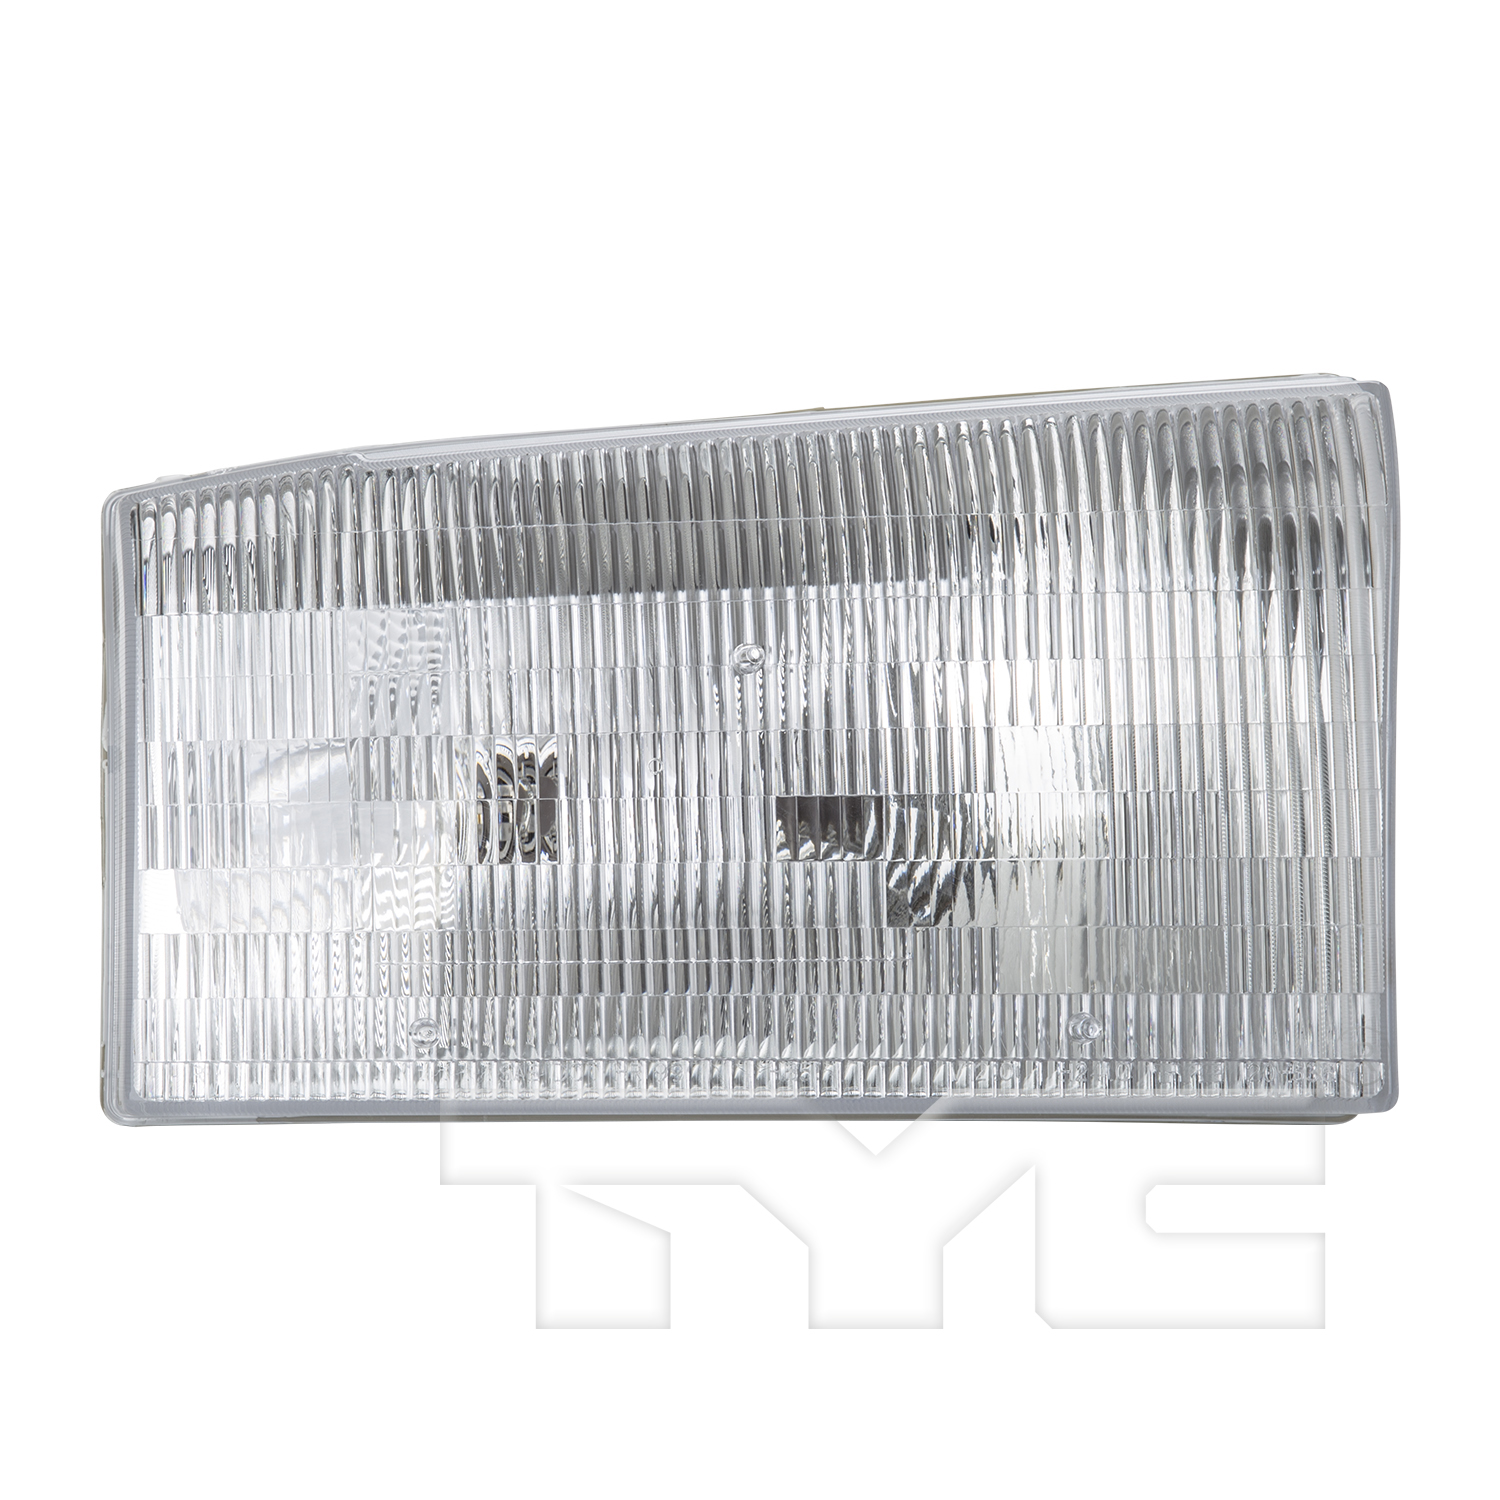 Aftermarket HEADLIGHTS for FORD - F-250 SUPER DUTY, F-250 SUPER DUTY,99-01,RT Headlamp assy composite